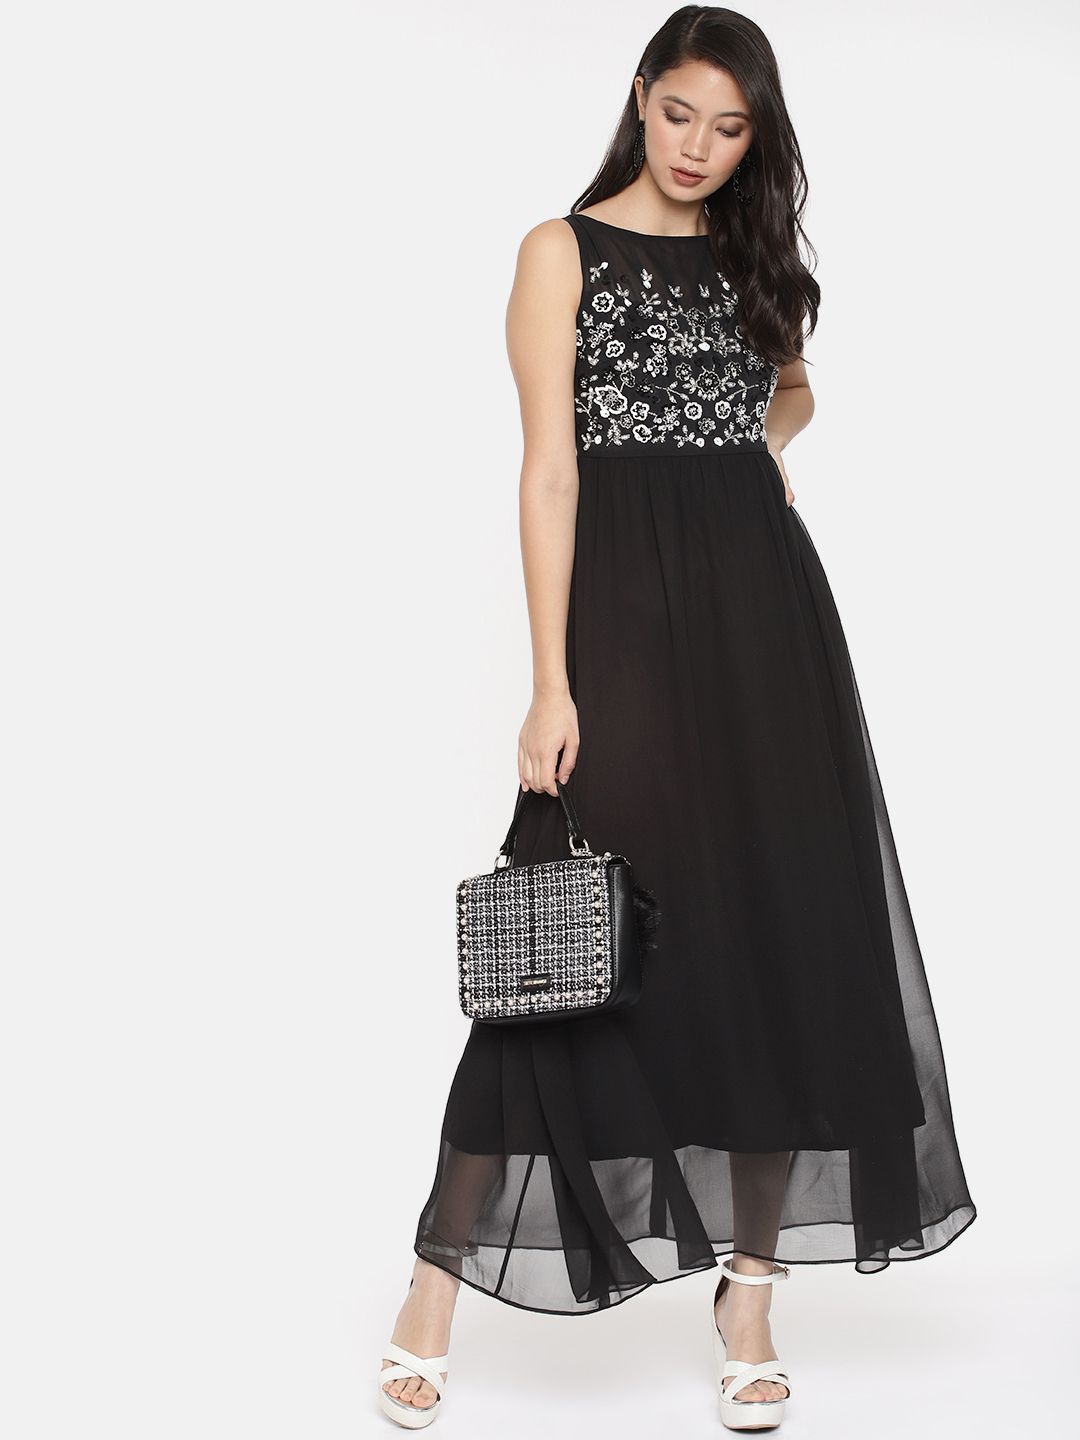 Miss Chase Black Sequined Embroidered Party Maxi Dress Price in India